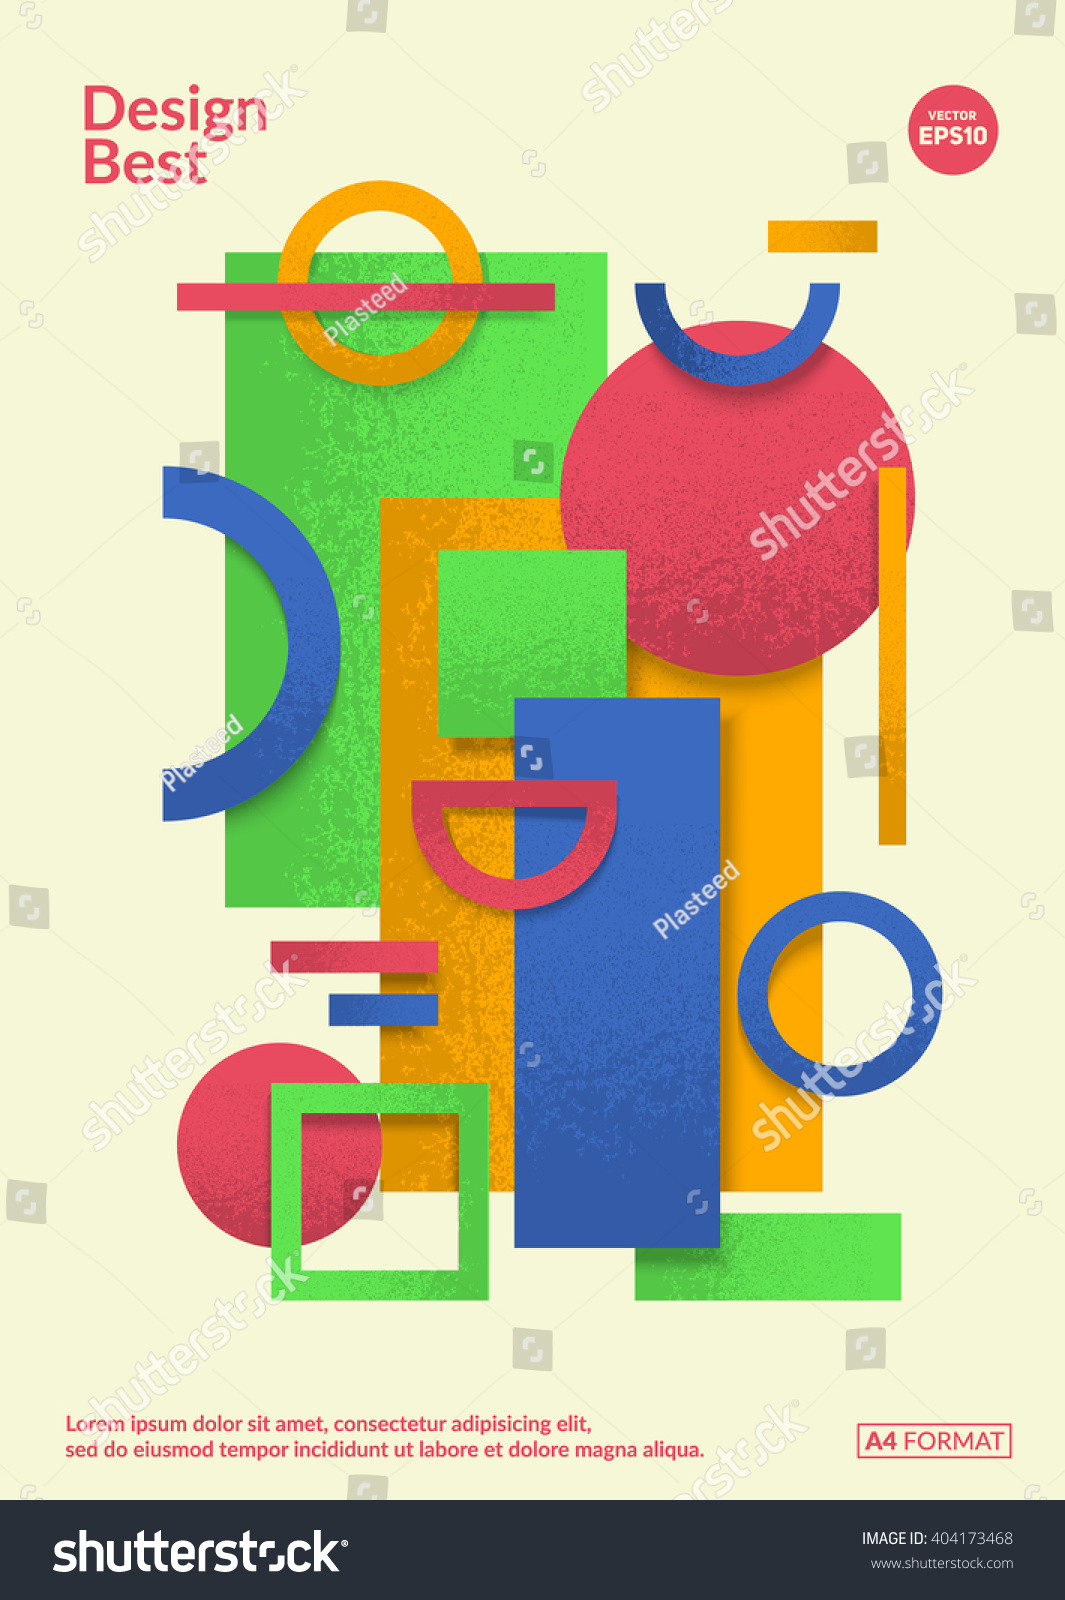 Static Design Poster Simple Colorful Geometric Stock Vector Royalty Free